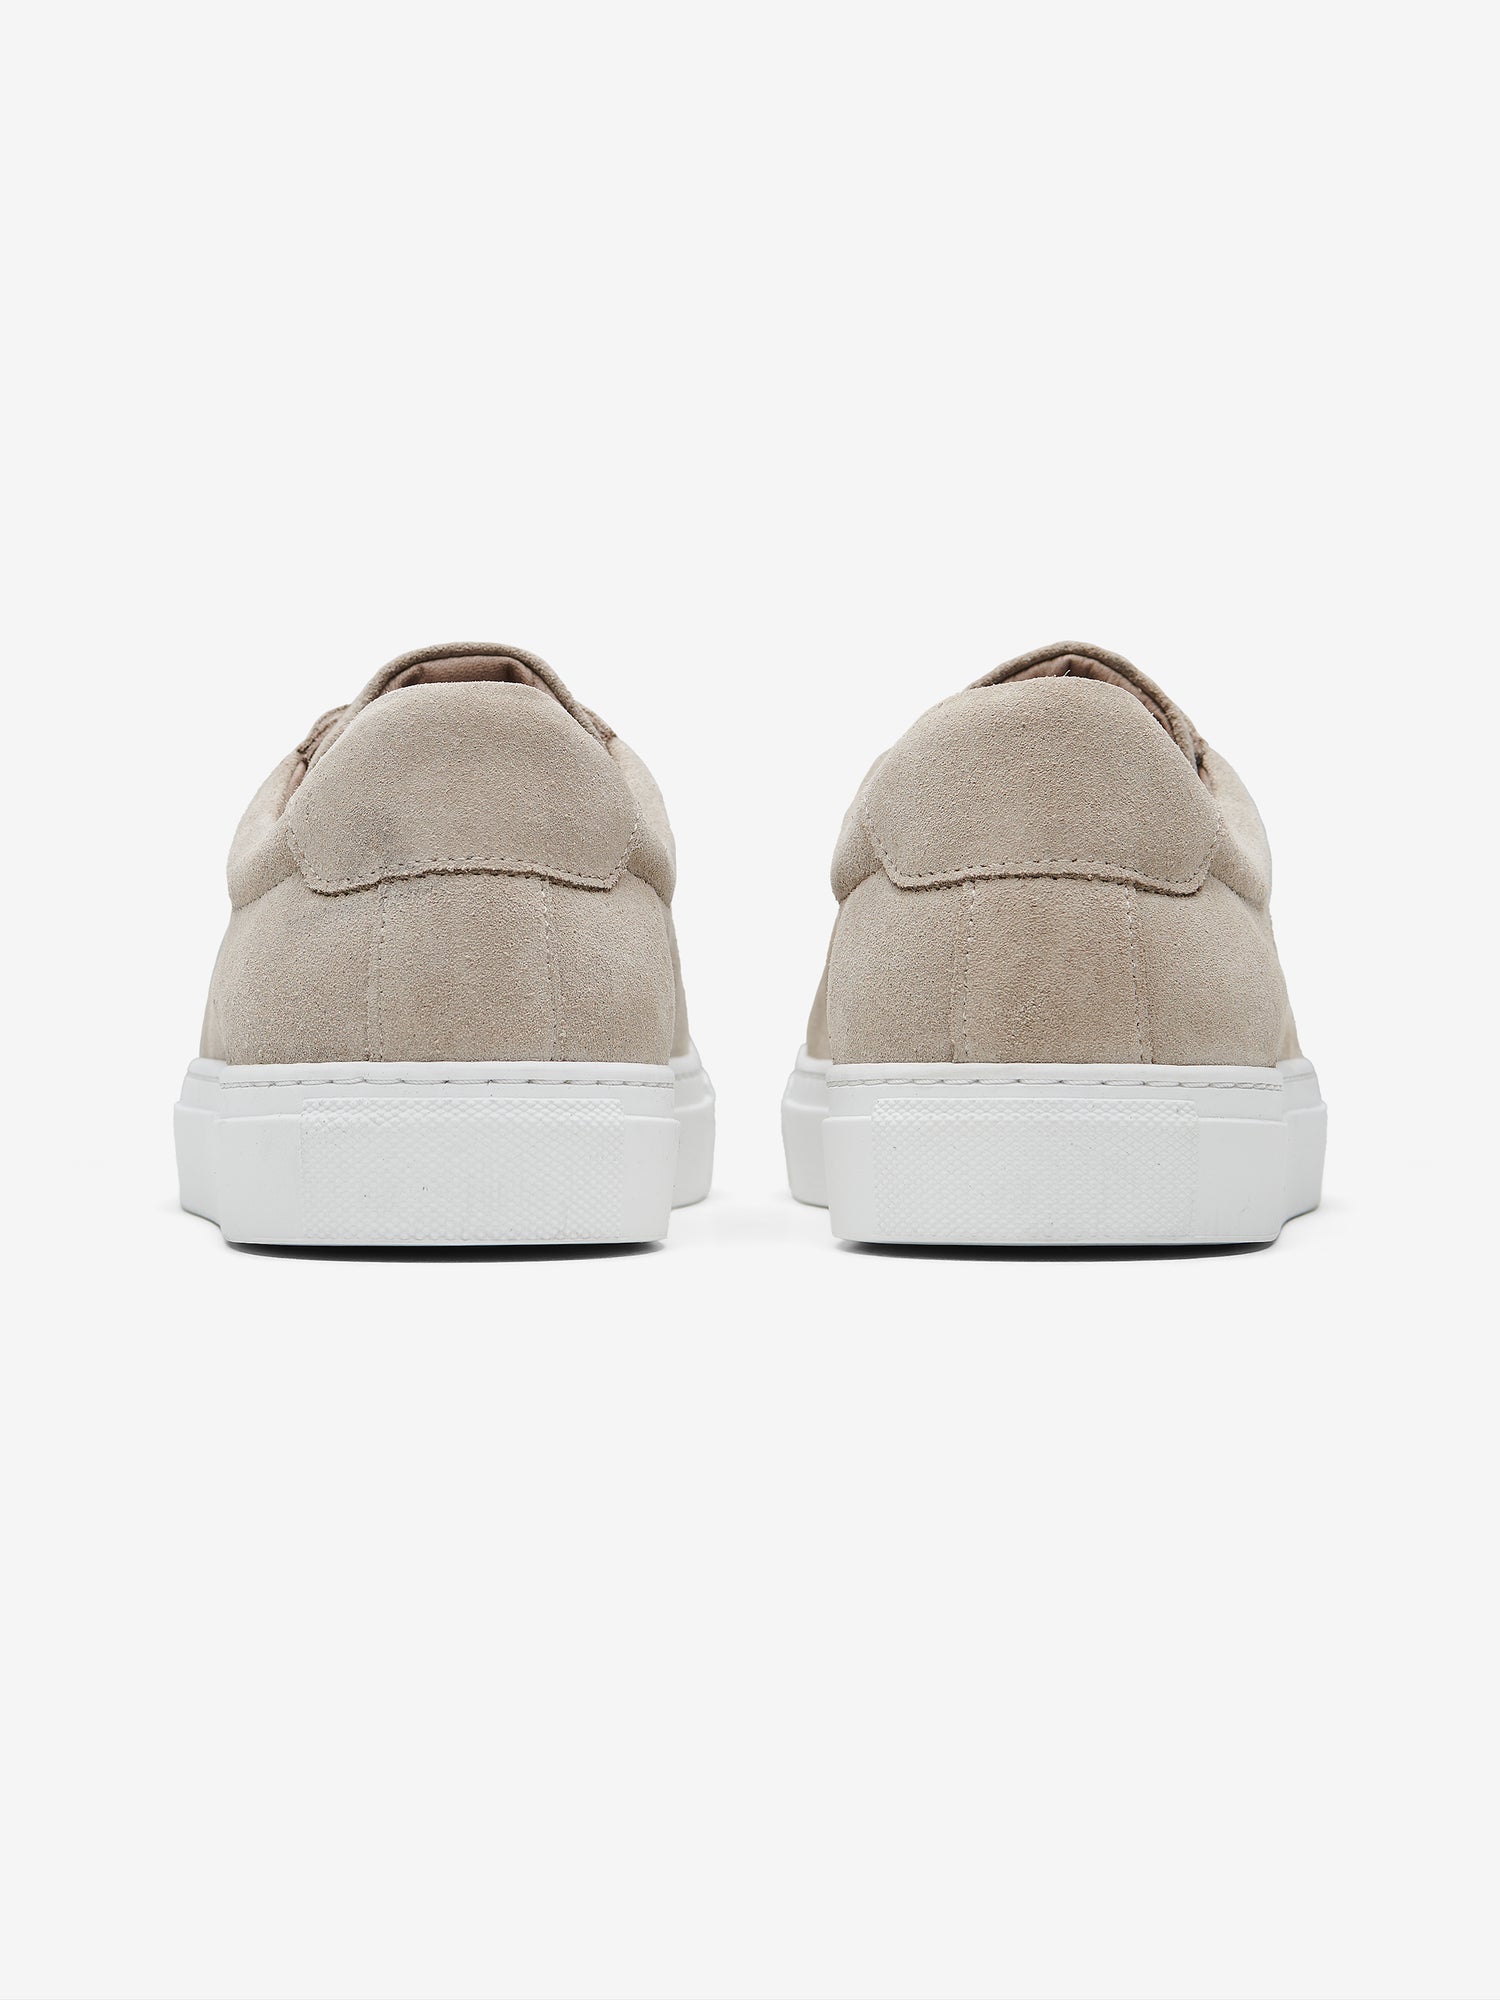 Dundee Suede FW90071-BEI